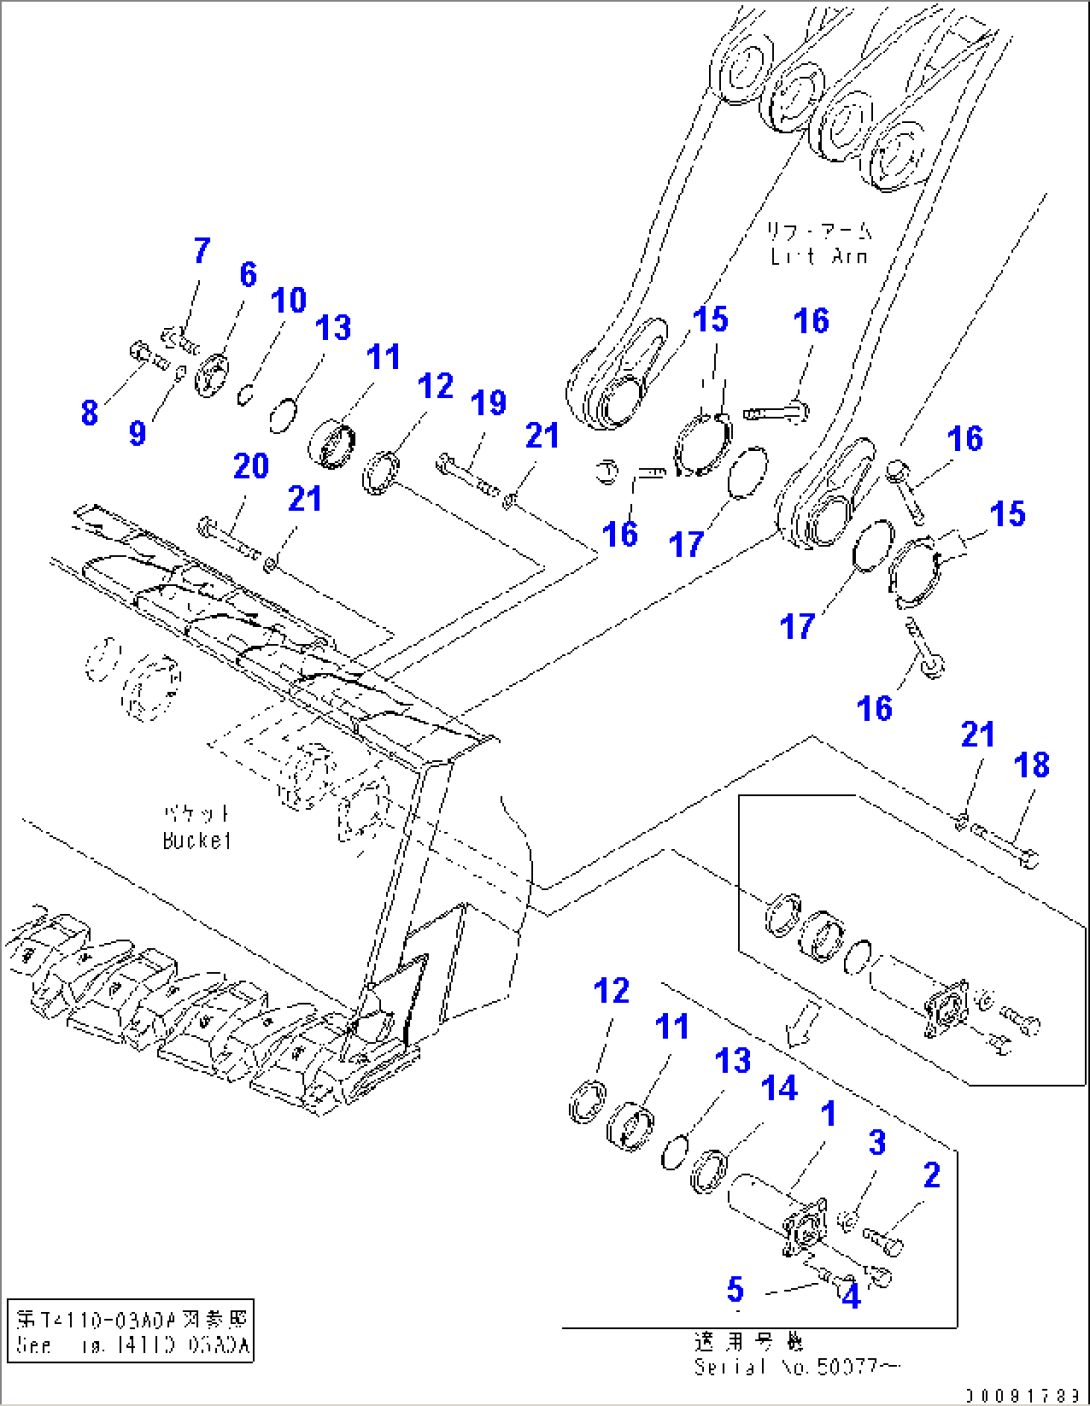 FRONT FRAME (LIFT ARM - BUCKET MOUNTING PARTS) (INCLUDING PIN)(#50079-)